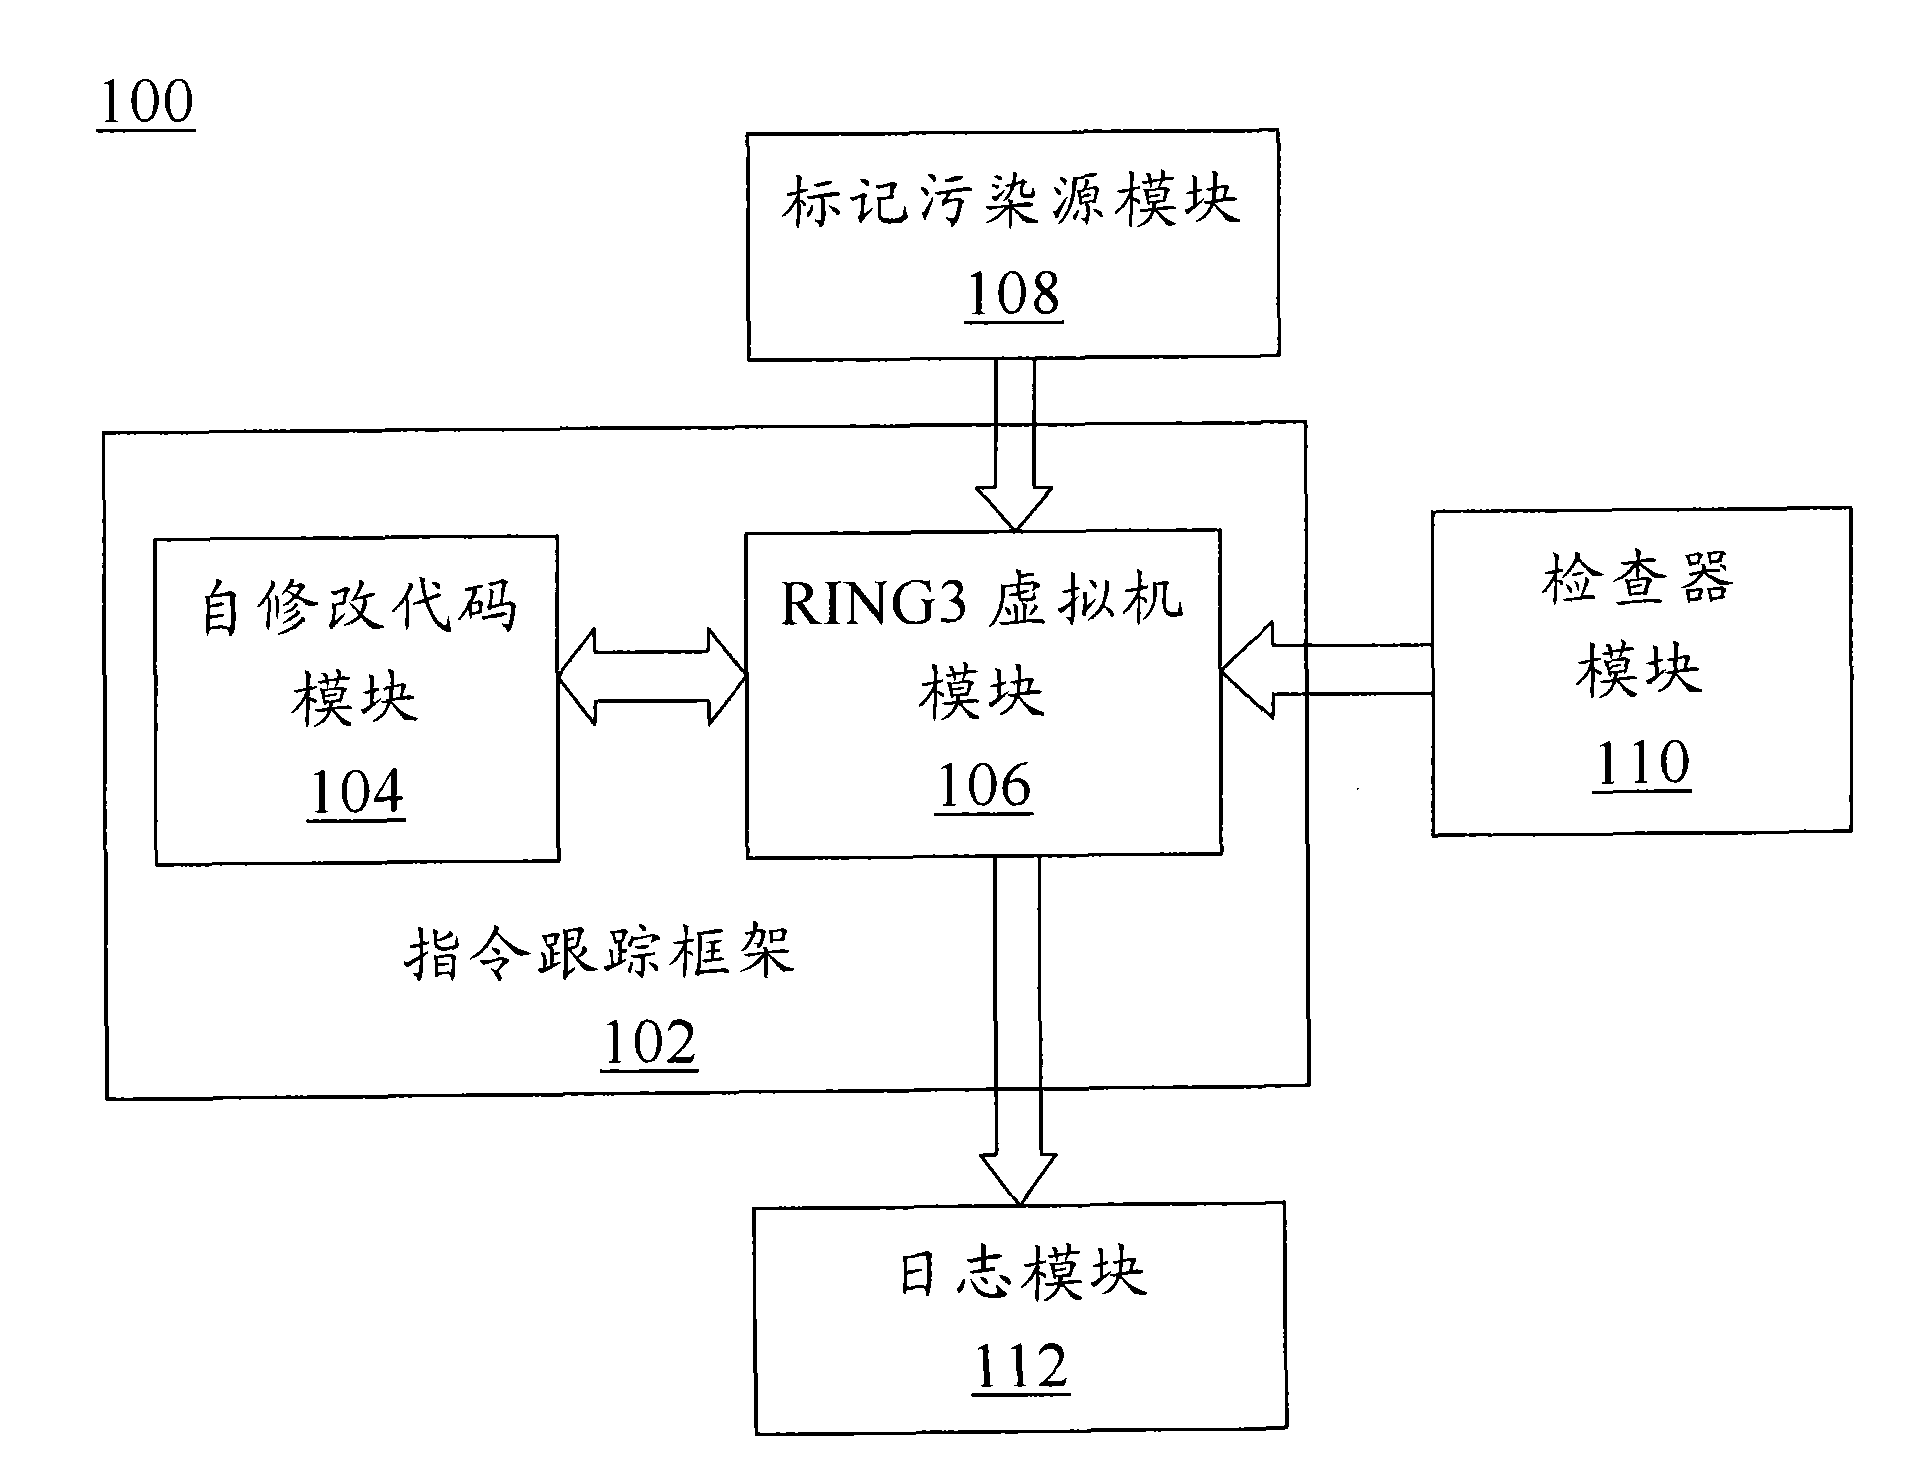 Software security testing system and method based on dynamic taint propagation